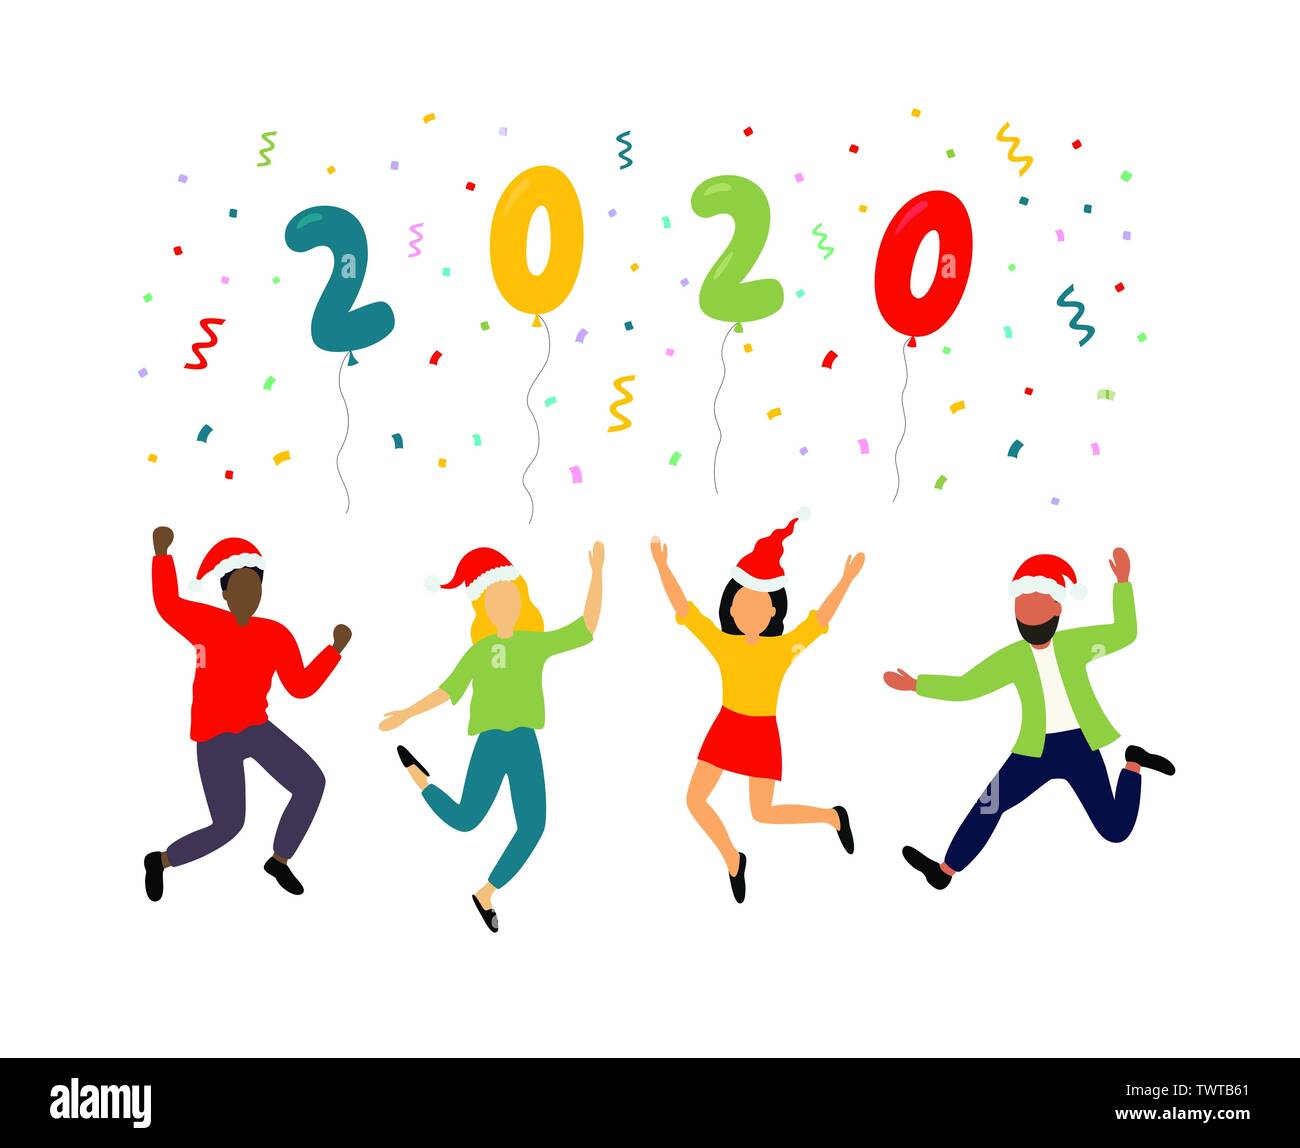 2020 Happy New Year background. Cartoon doodle illustration with people holding balloons. Stock Vector